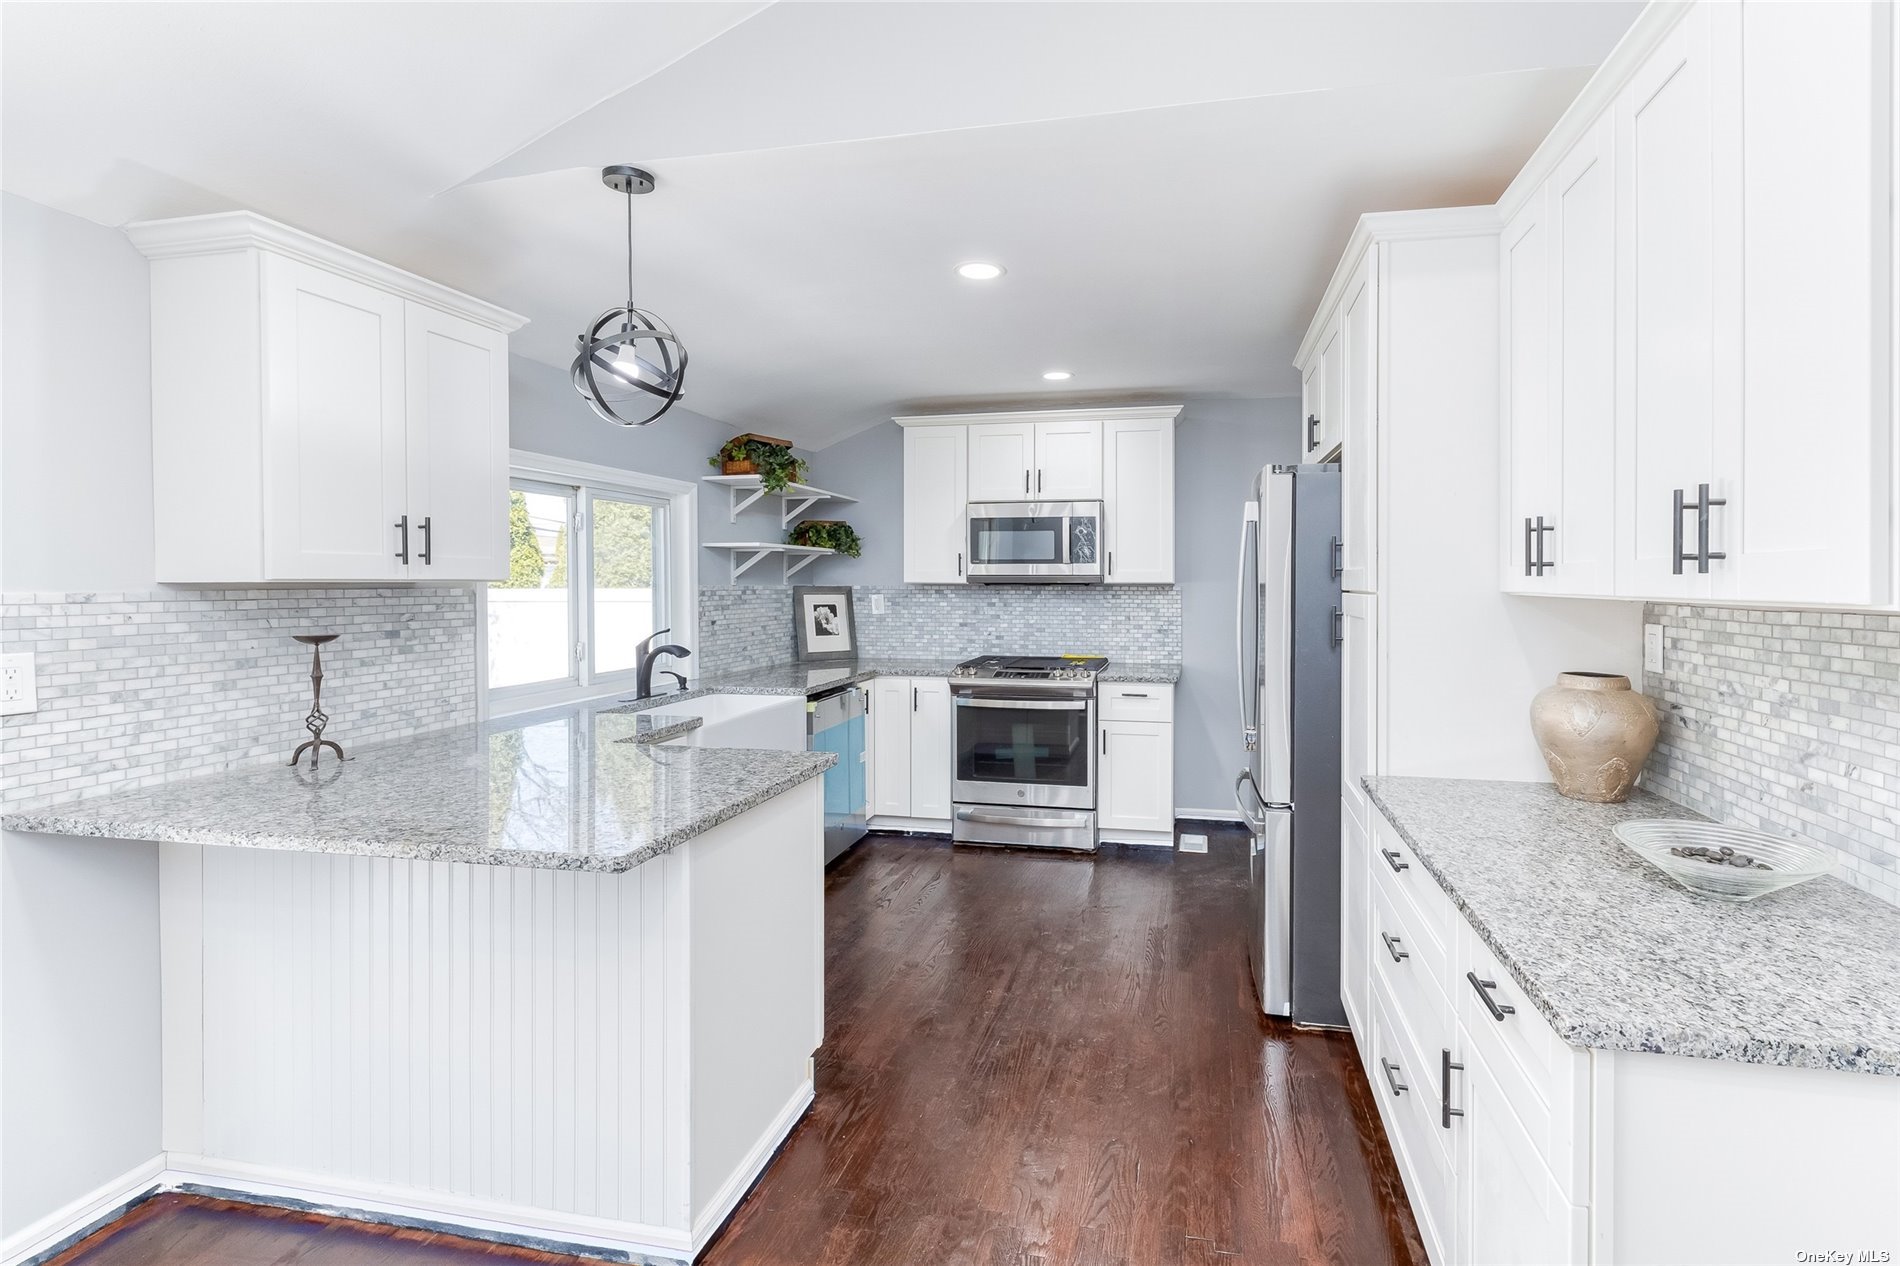 a large kitchen with granite countertop a sink dishwasher stove and oven with wooden floor